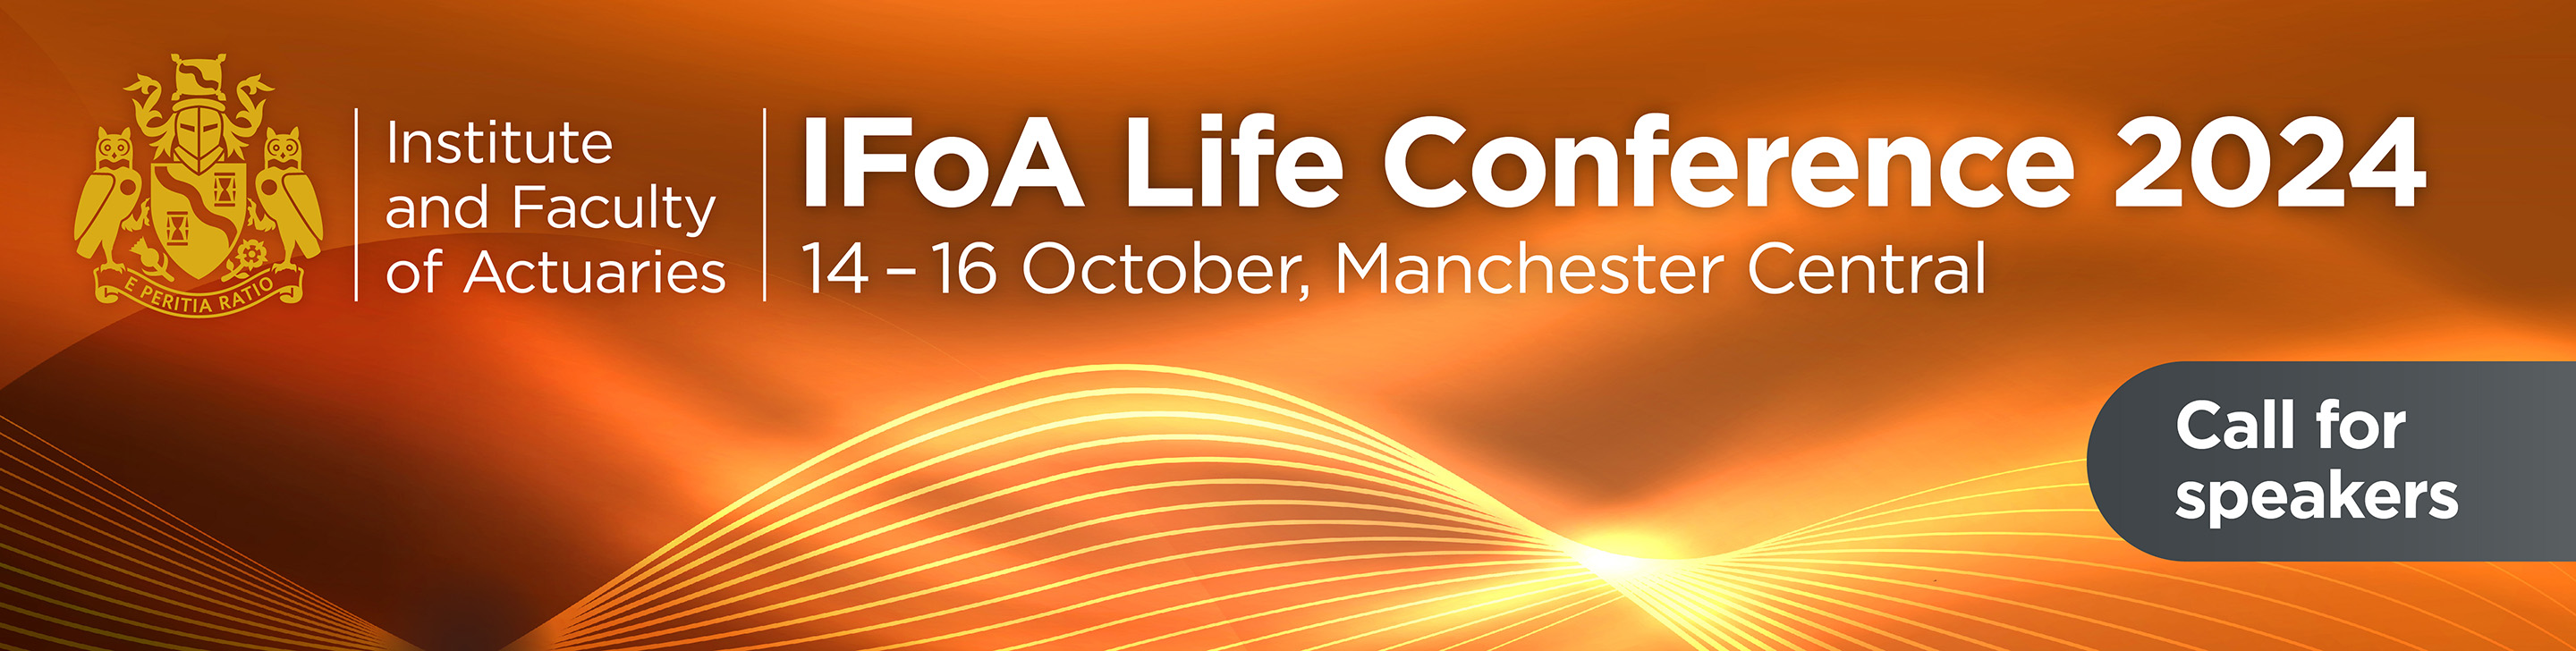 IFoA Life Conference 2024, 14 to 16 October, Manchester Central, call for speakers